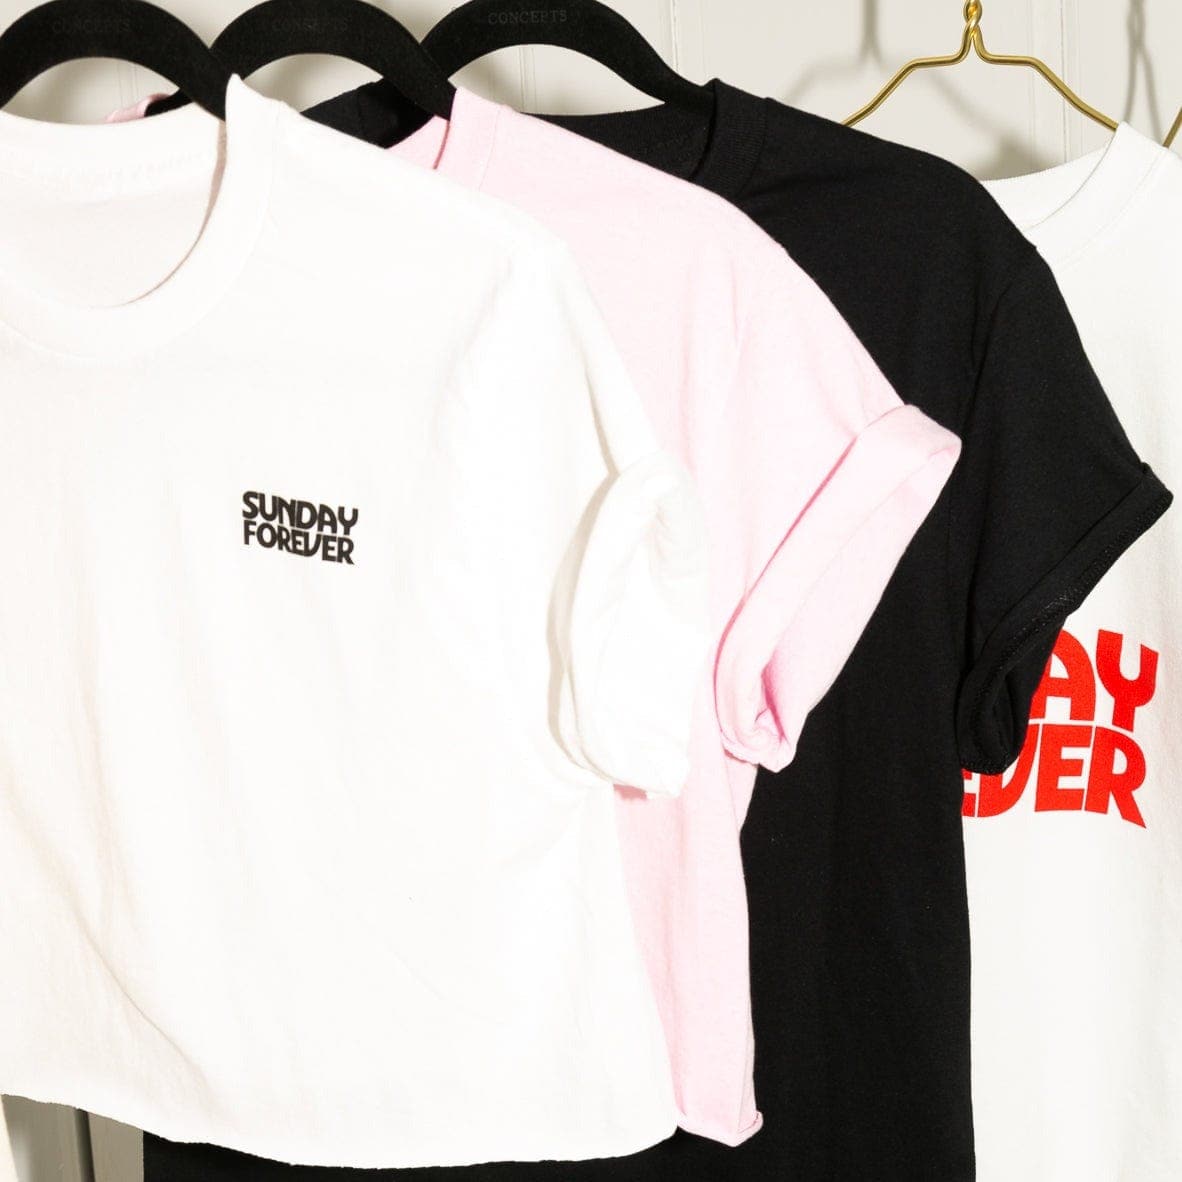 New! 2023 Nice List Band Tee XLarge / Light Pink-Sunday Forever Nyc